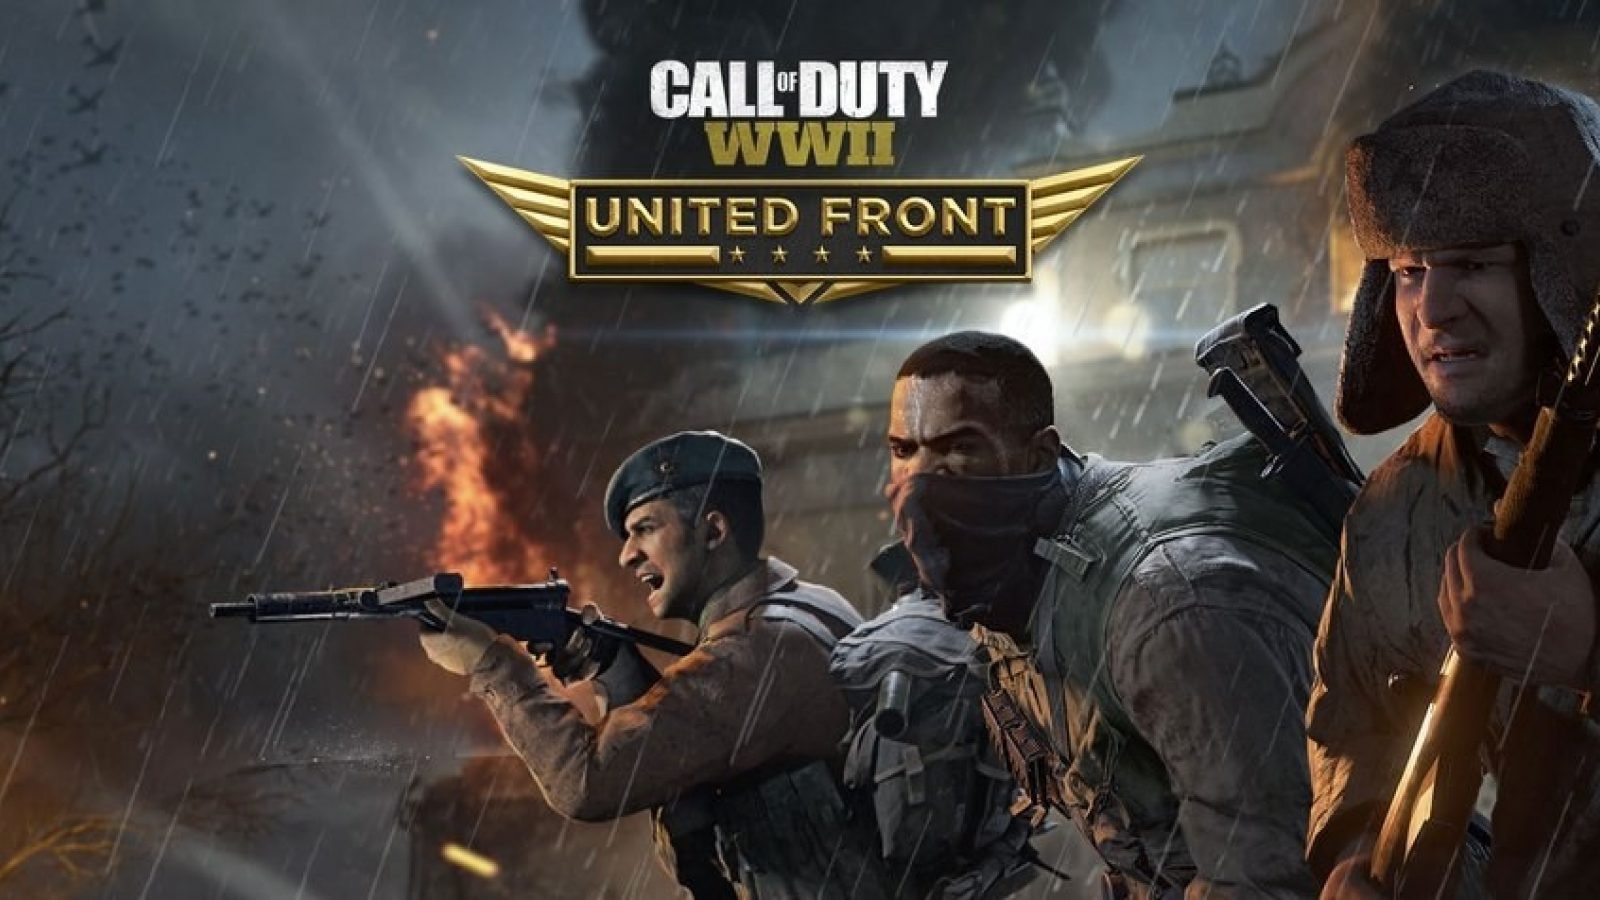 Call of Duty WWII United Front 4